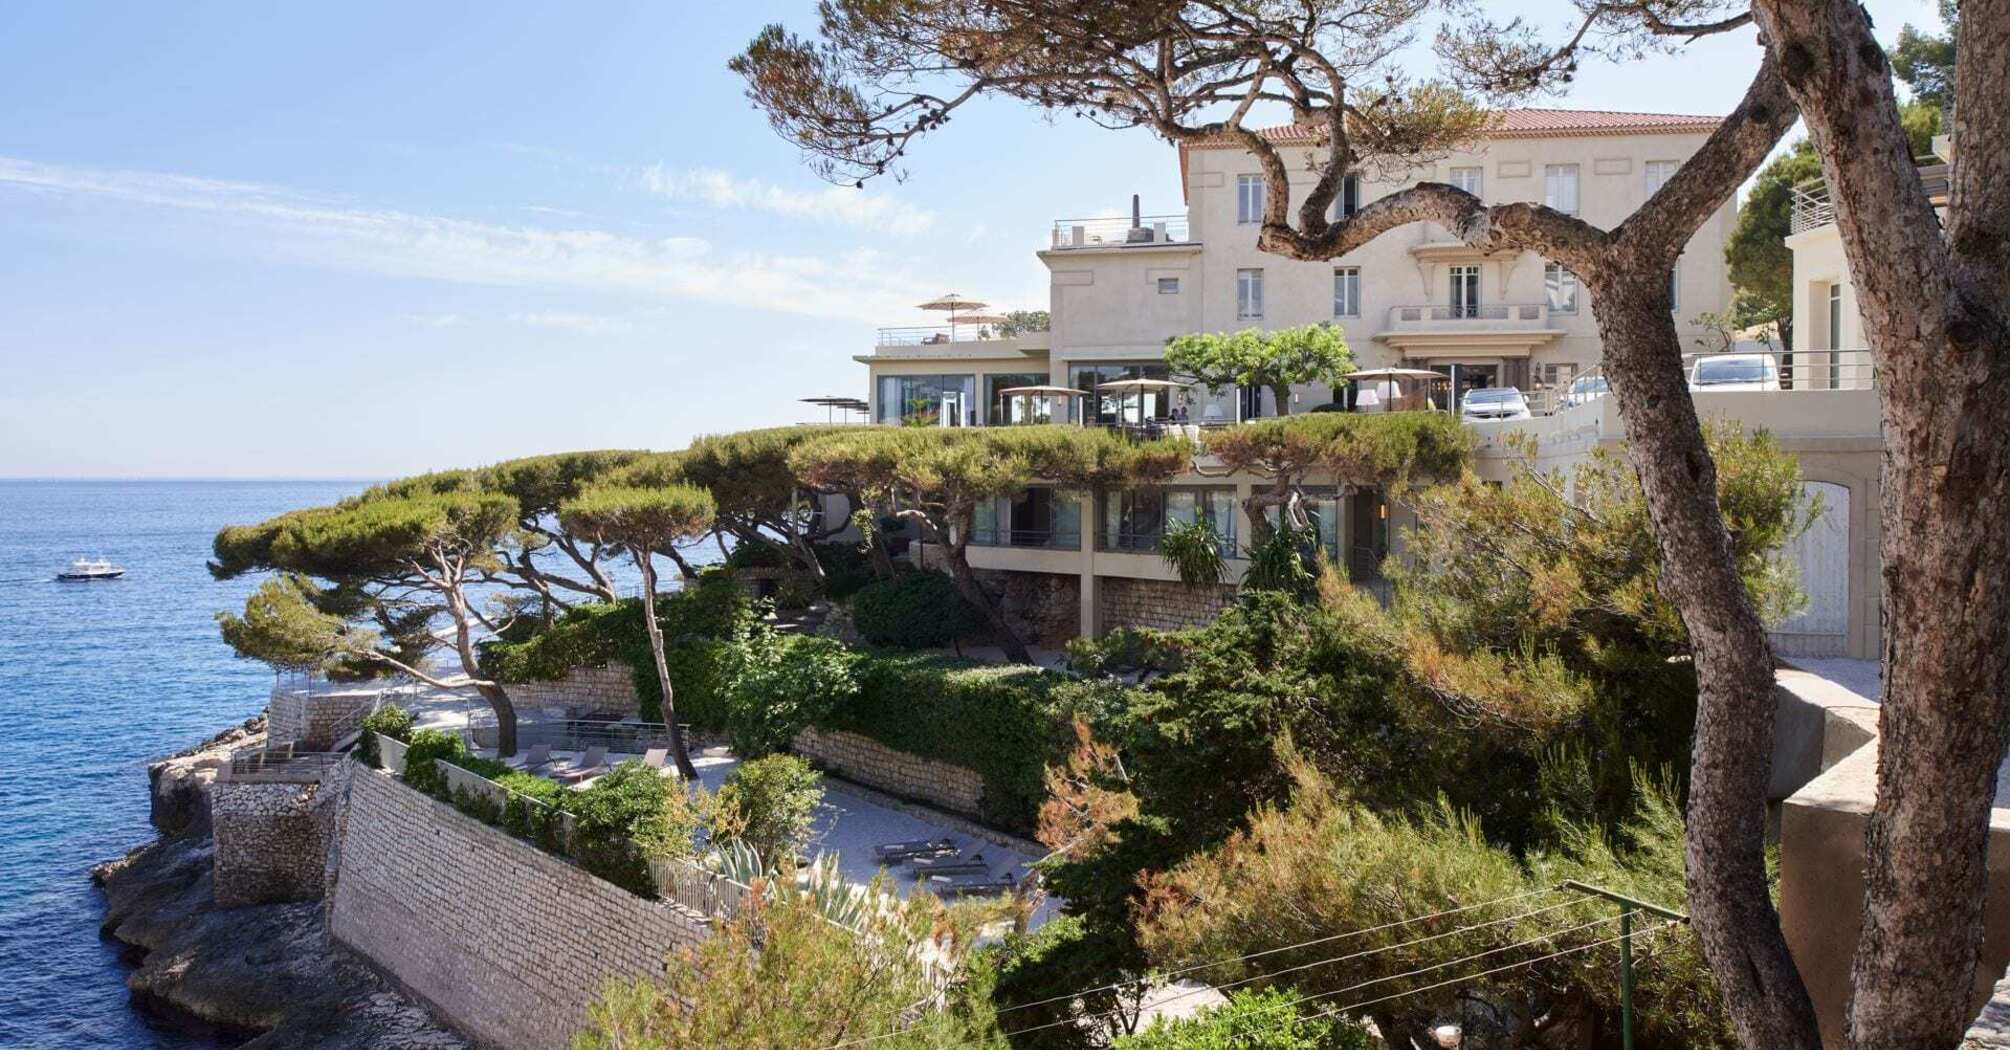 Top 9 hotels in the South of France: from beach boutiques and historic mansions to fantastic resorts on the French Riviera